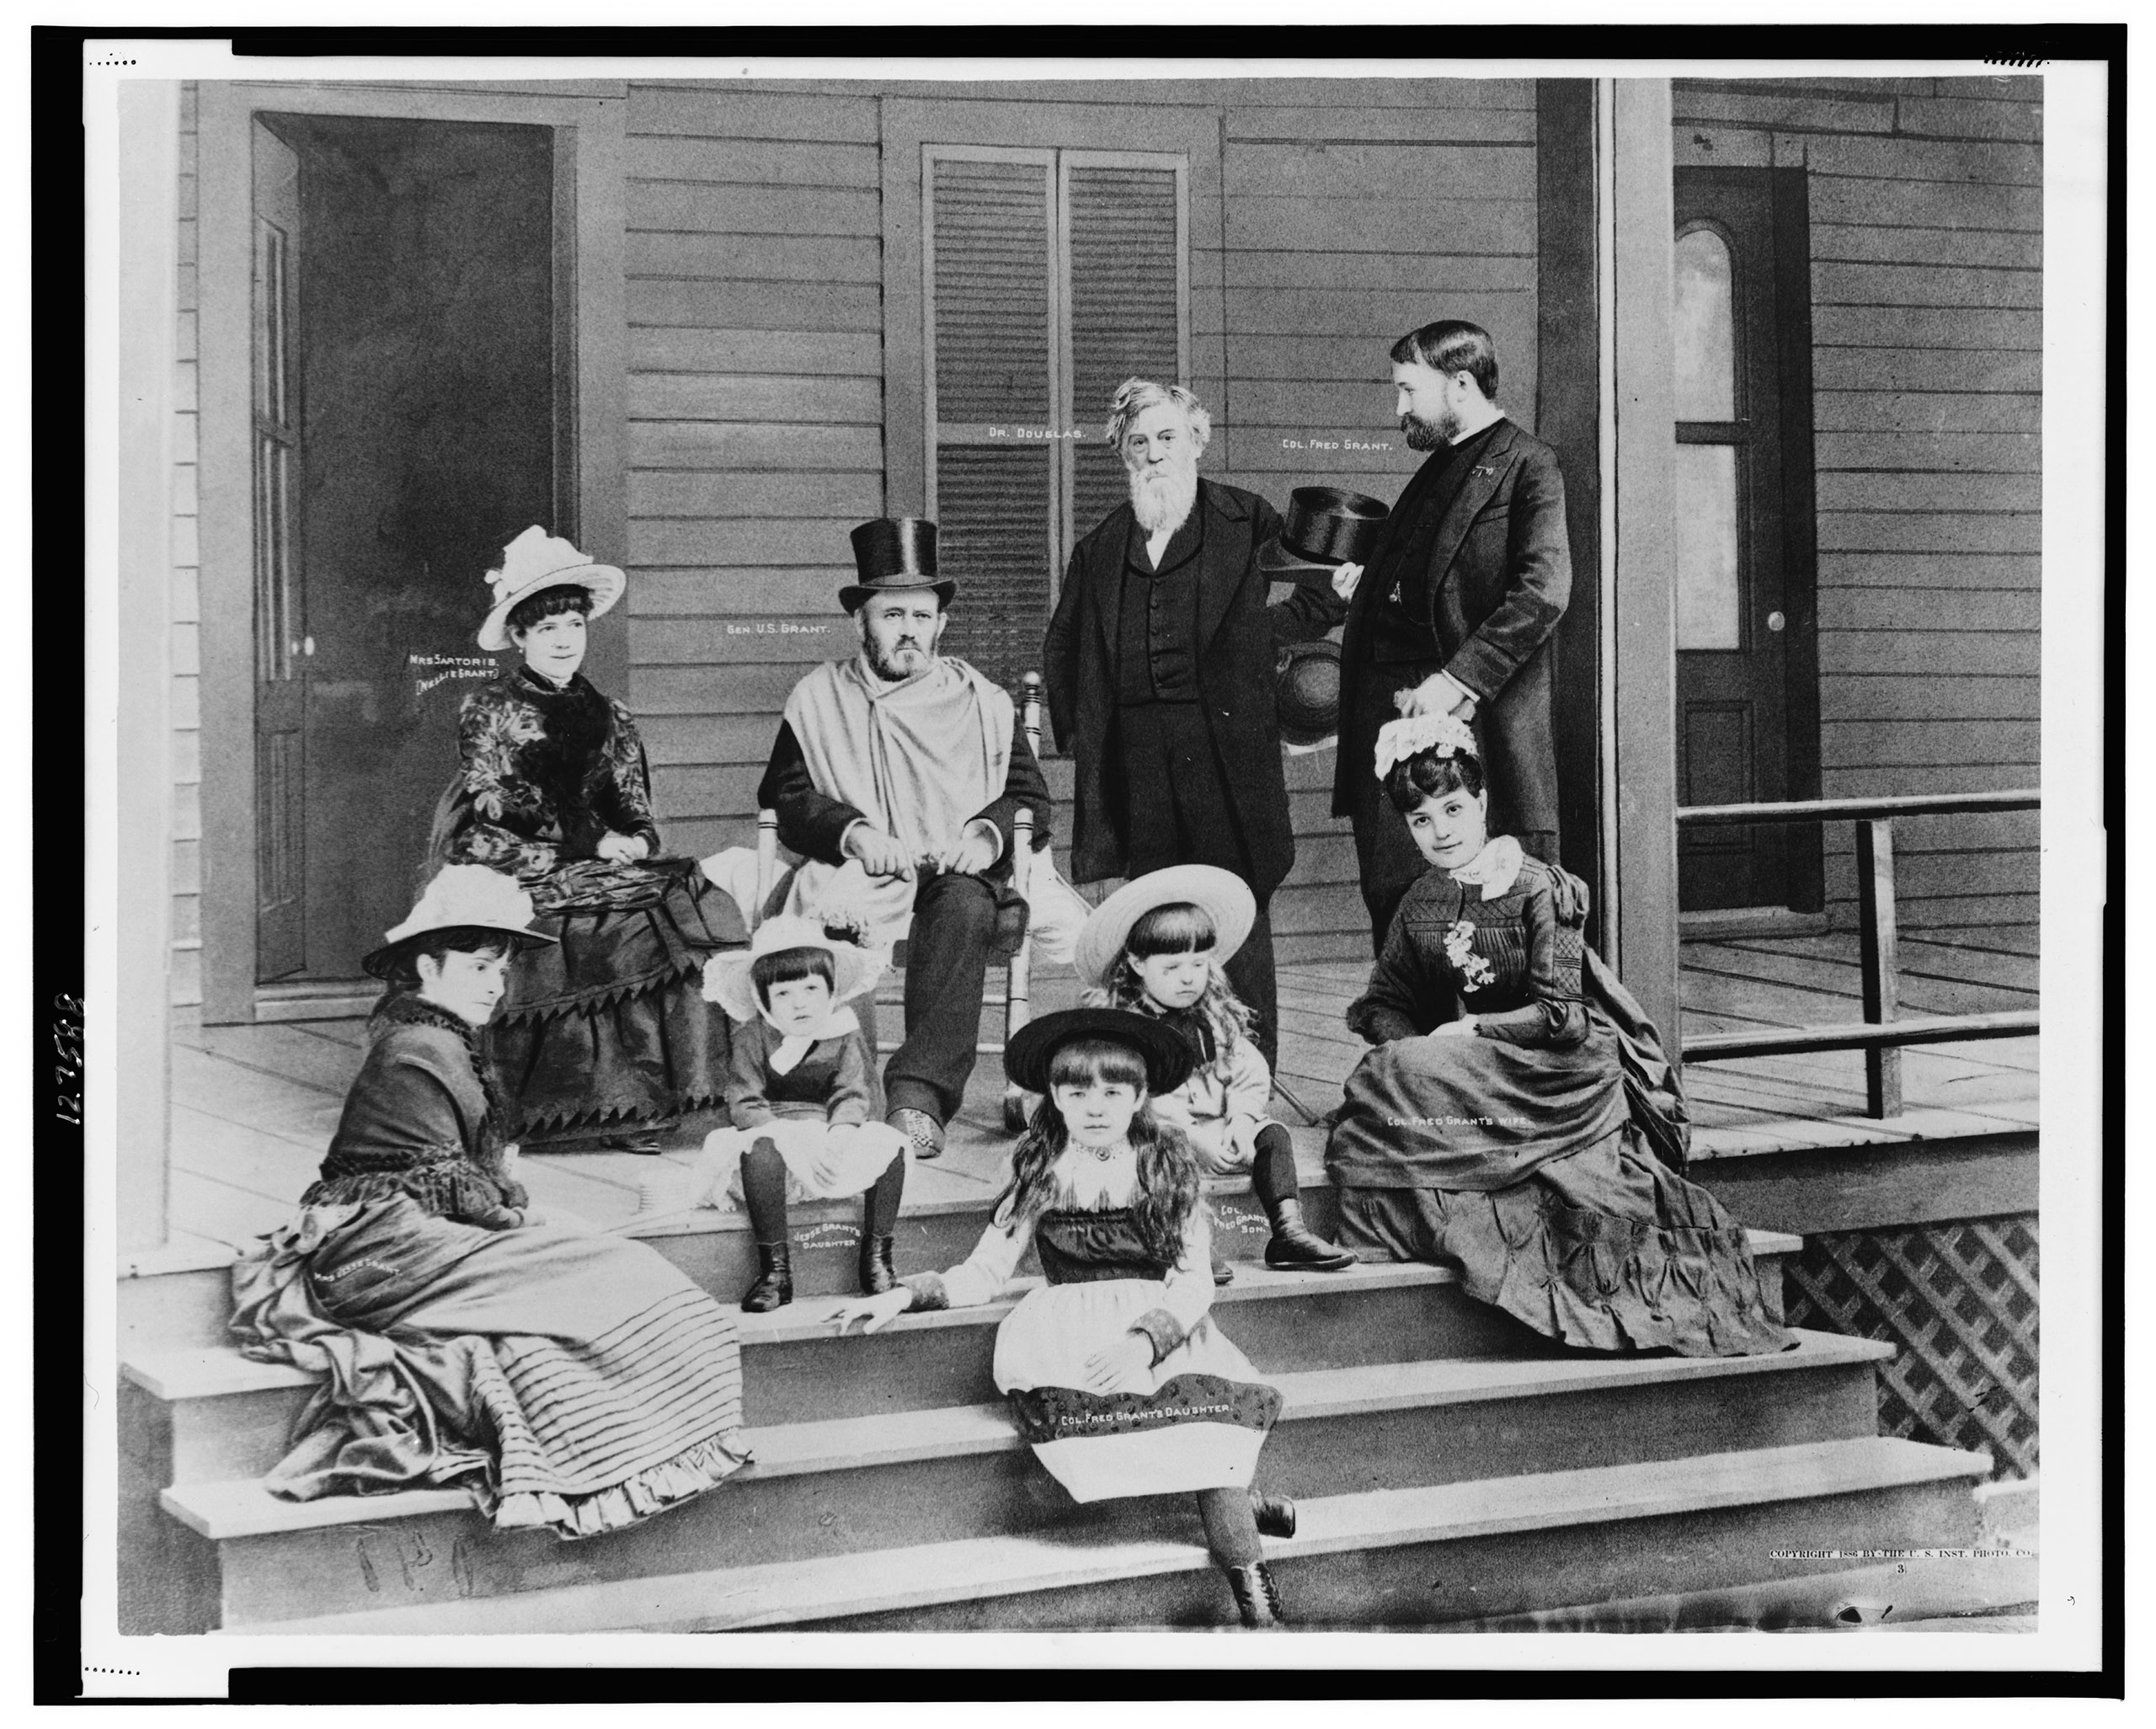 Ulysses S. Grant:
                              Three of Grant's four children gathered for this multigenerational portrait taken around 1880: his only daughter Nellie, far left, his youngest son Jesse (behind her) and the eldest, Frederick, standing toward the right, with hand on hip. Jesse was an author, engineer and world traveler. Frederick served with his father on the major battlefields of the Civil War. Nellie was married twice, the first time to a dissolute diplomat whose death left her a wealthy woman.